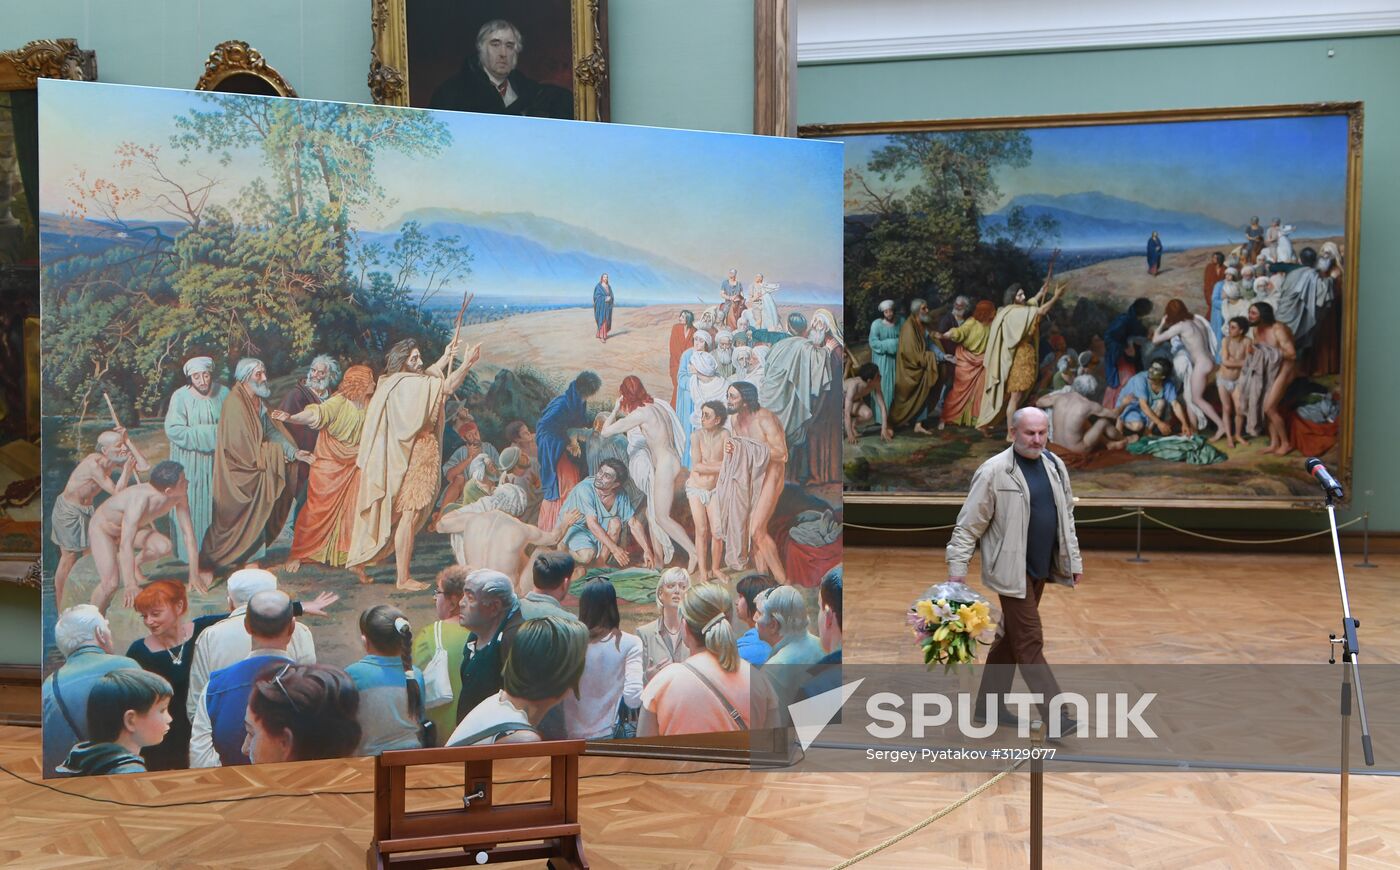 Erik Bulatov's painting "The Picture and Onlookers" transferred to Tretyakov Gallery